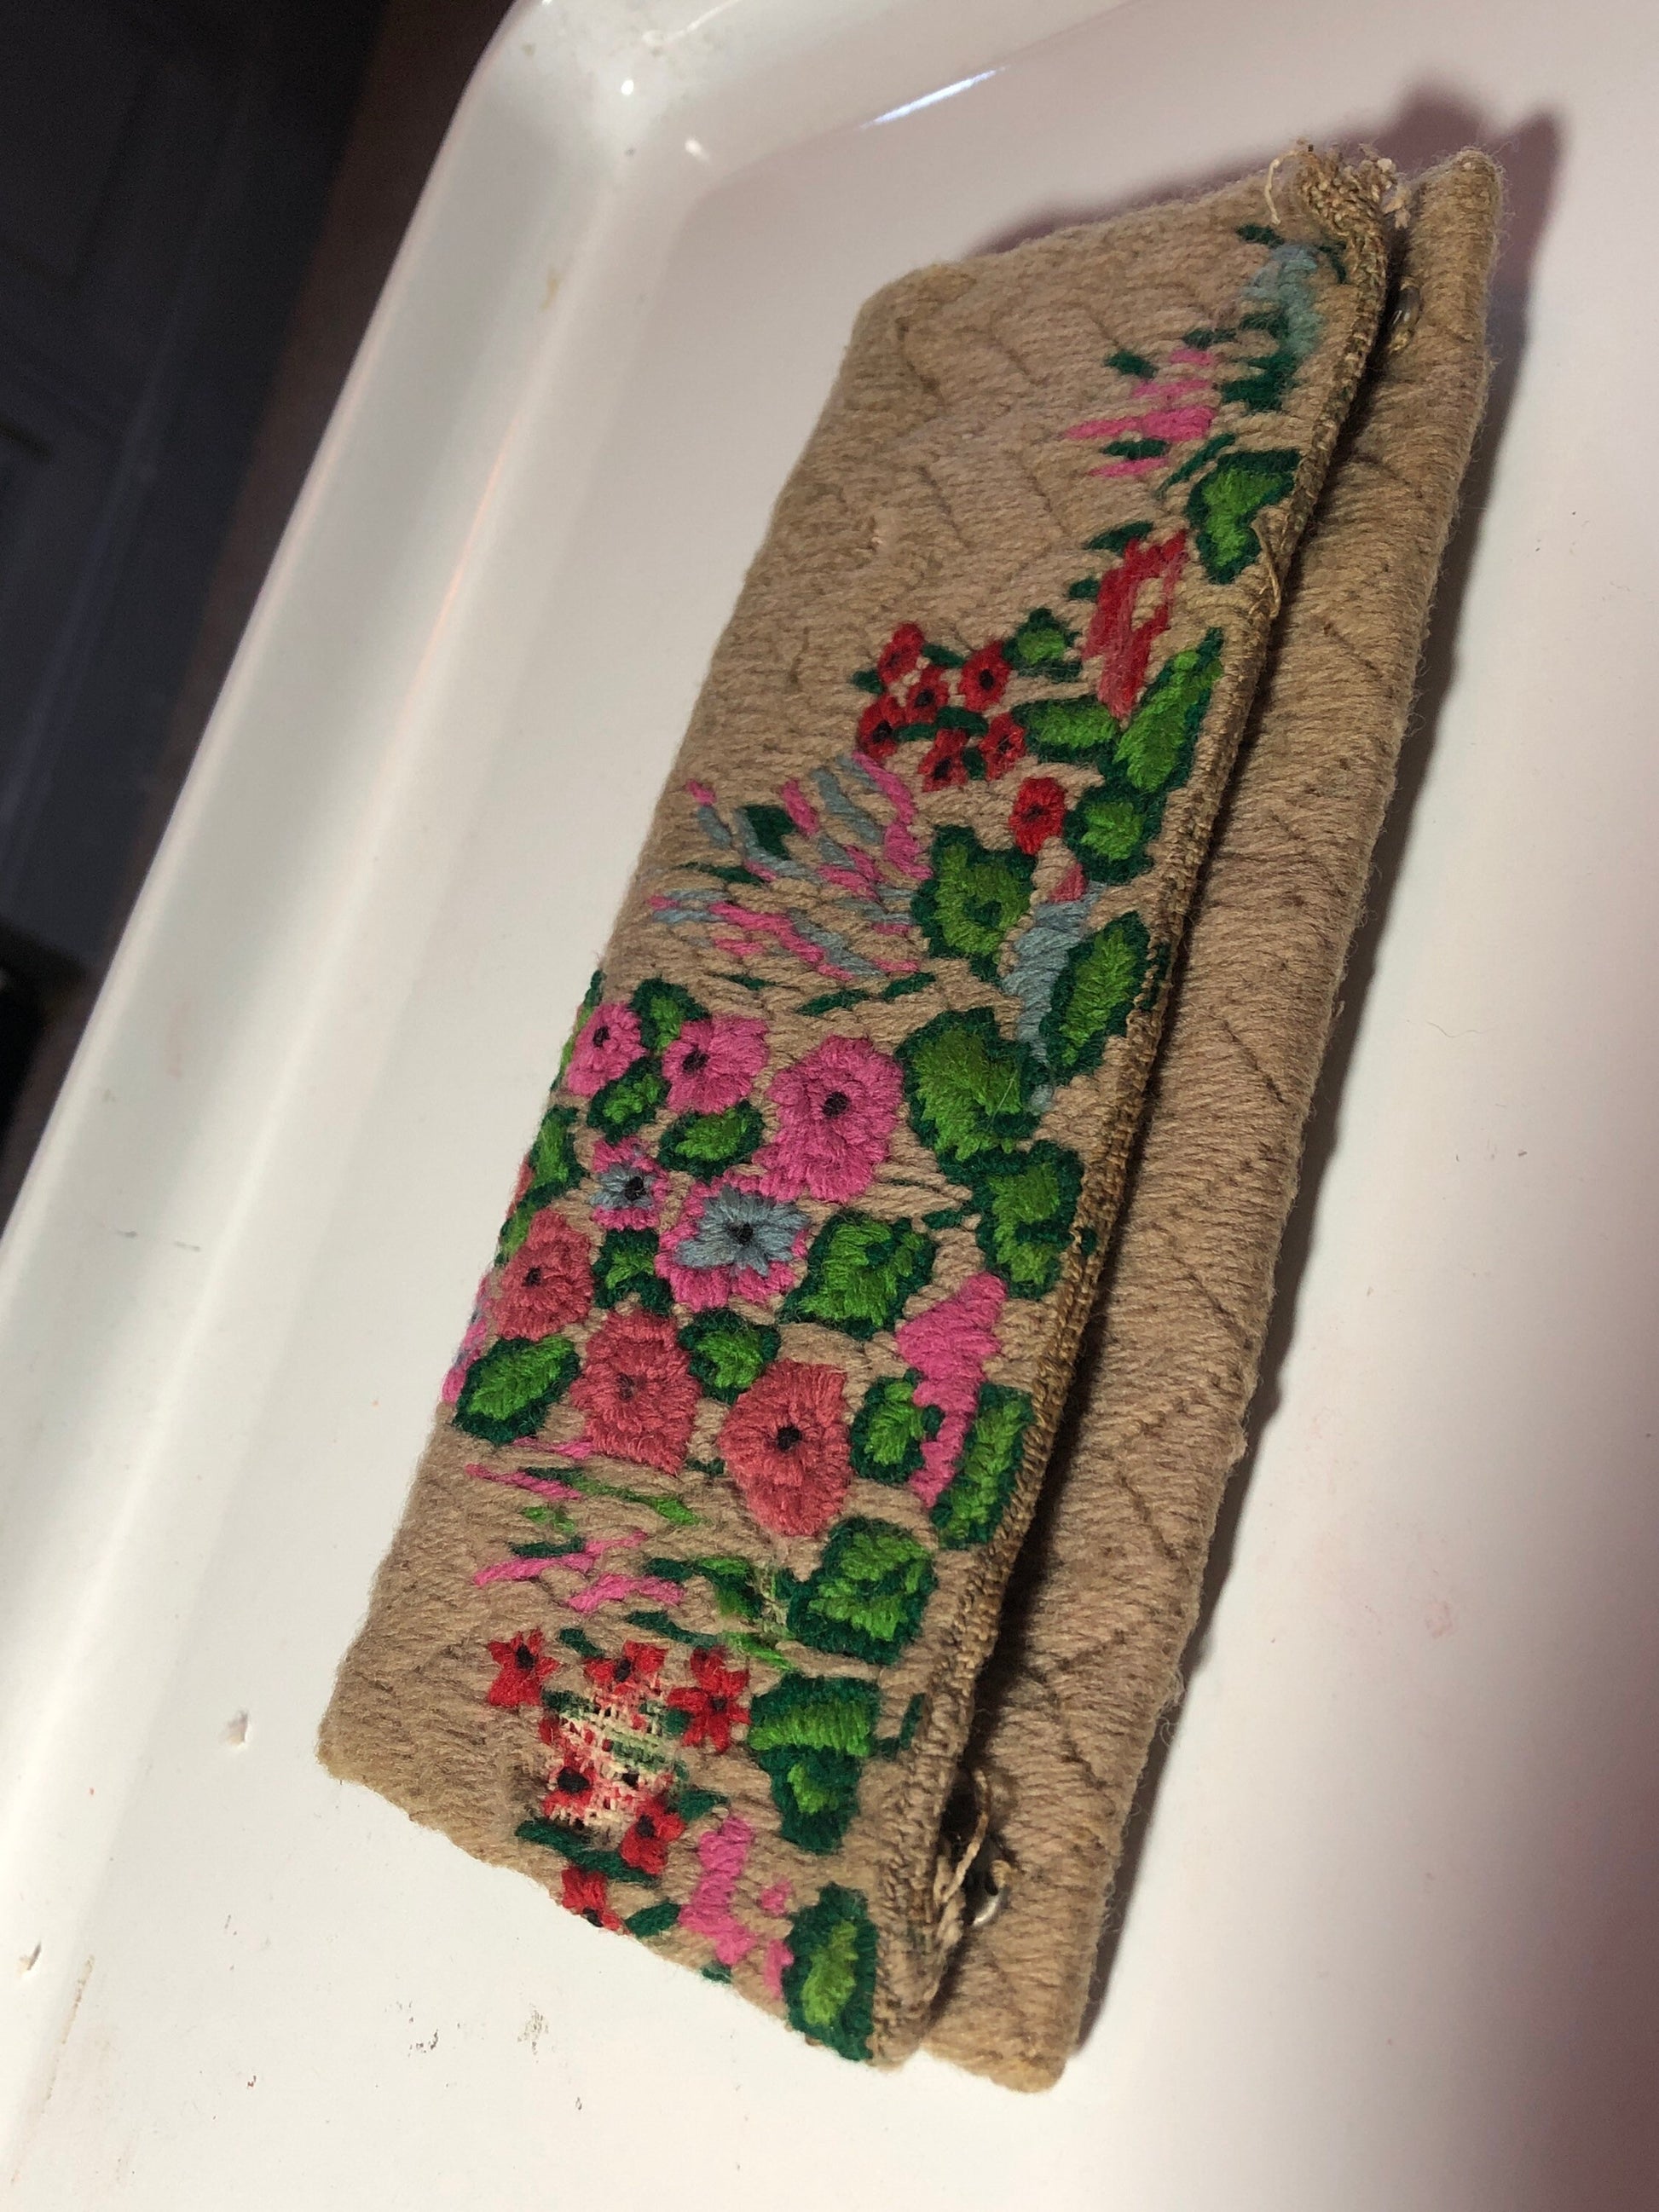 Antique originally silk lined war period hand embroidery Make Up Bag Cosmetic Purse Vintage pink red flowers